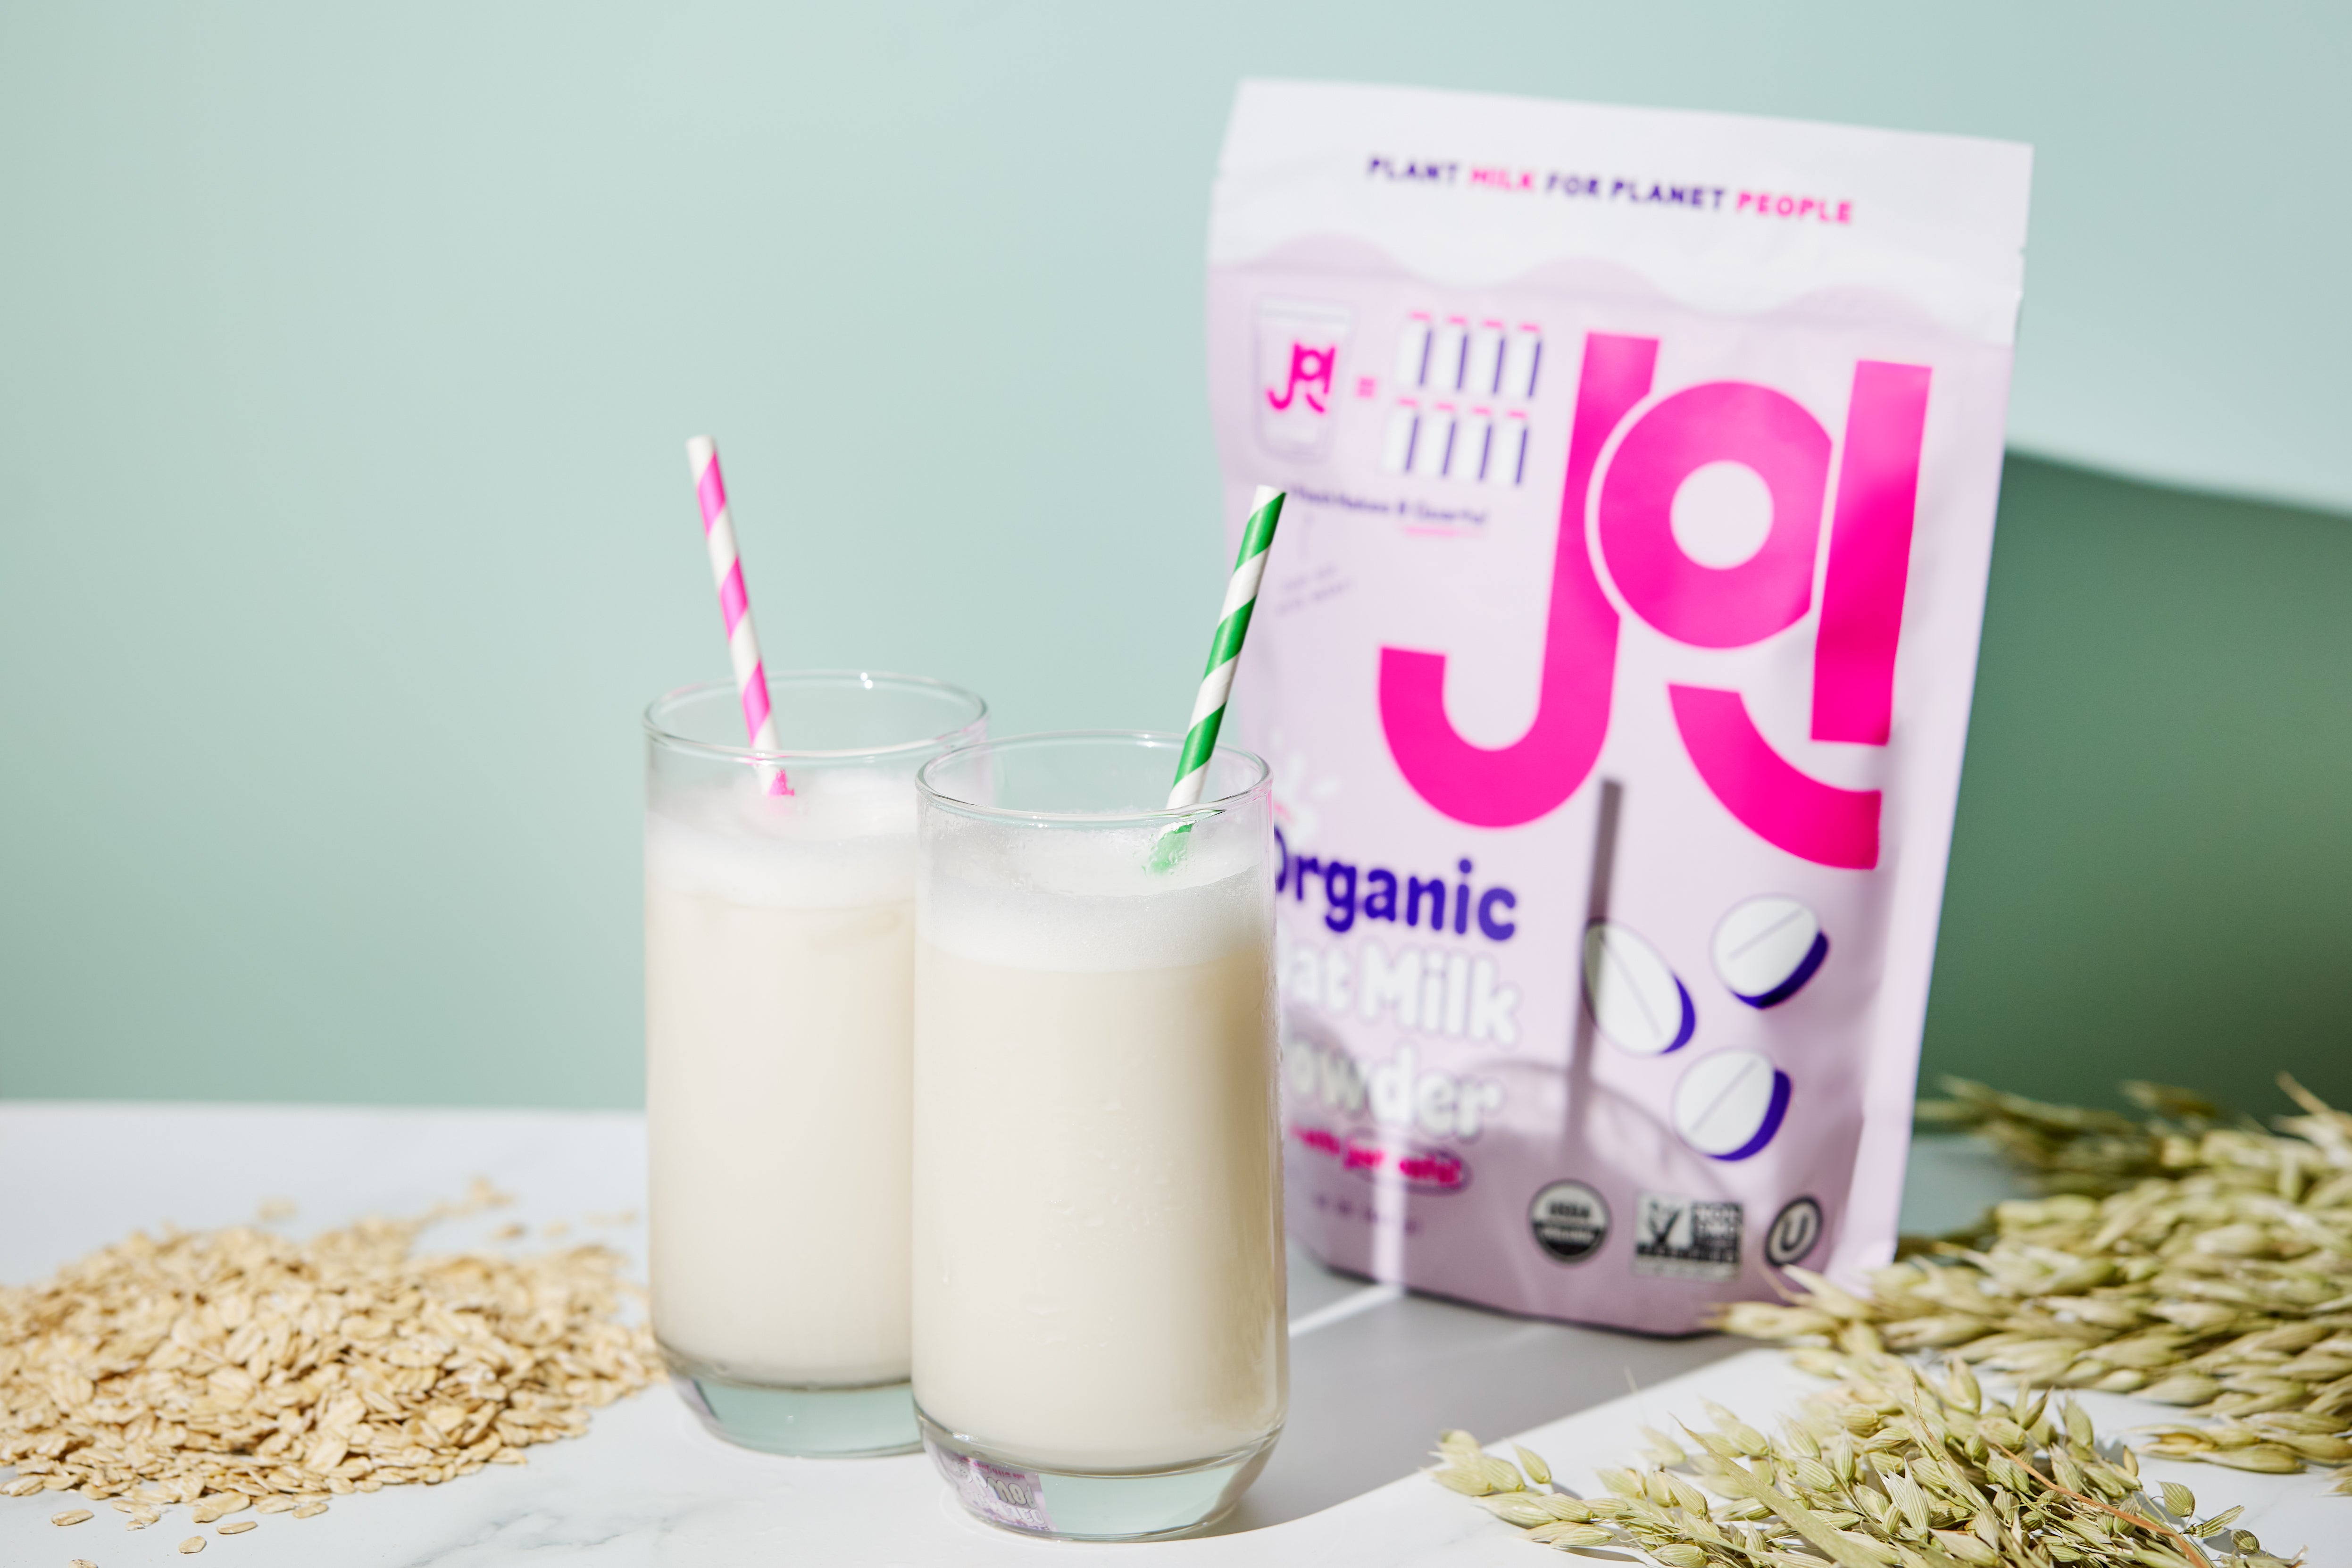 JOI's Instant Oat Milk Powder Now in PCR Packaging